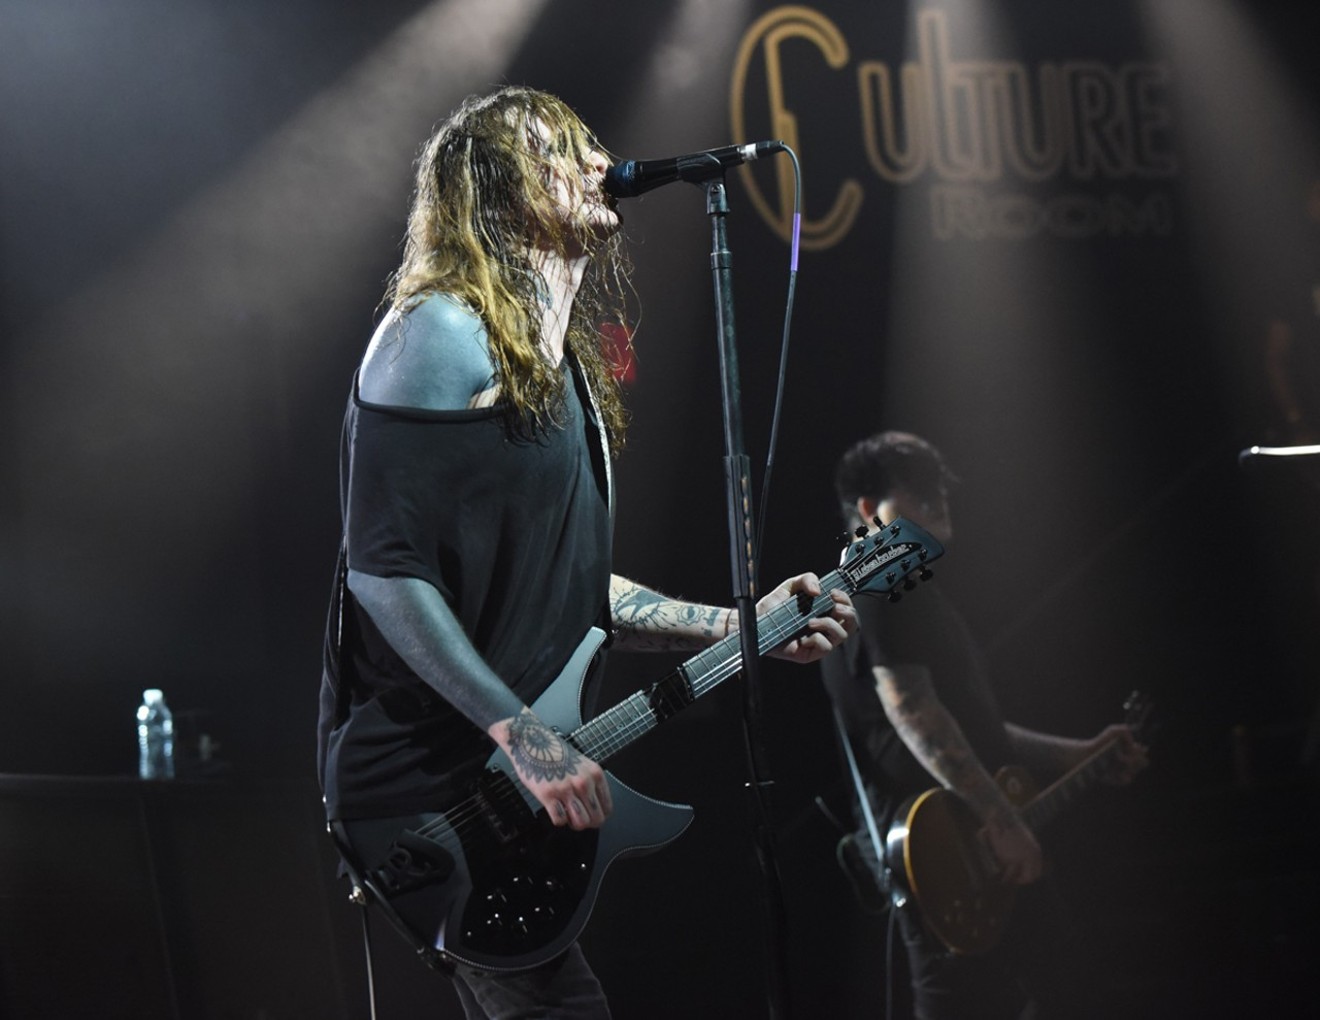 See more photos of Against Me! at Culture Room here.